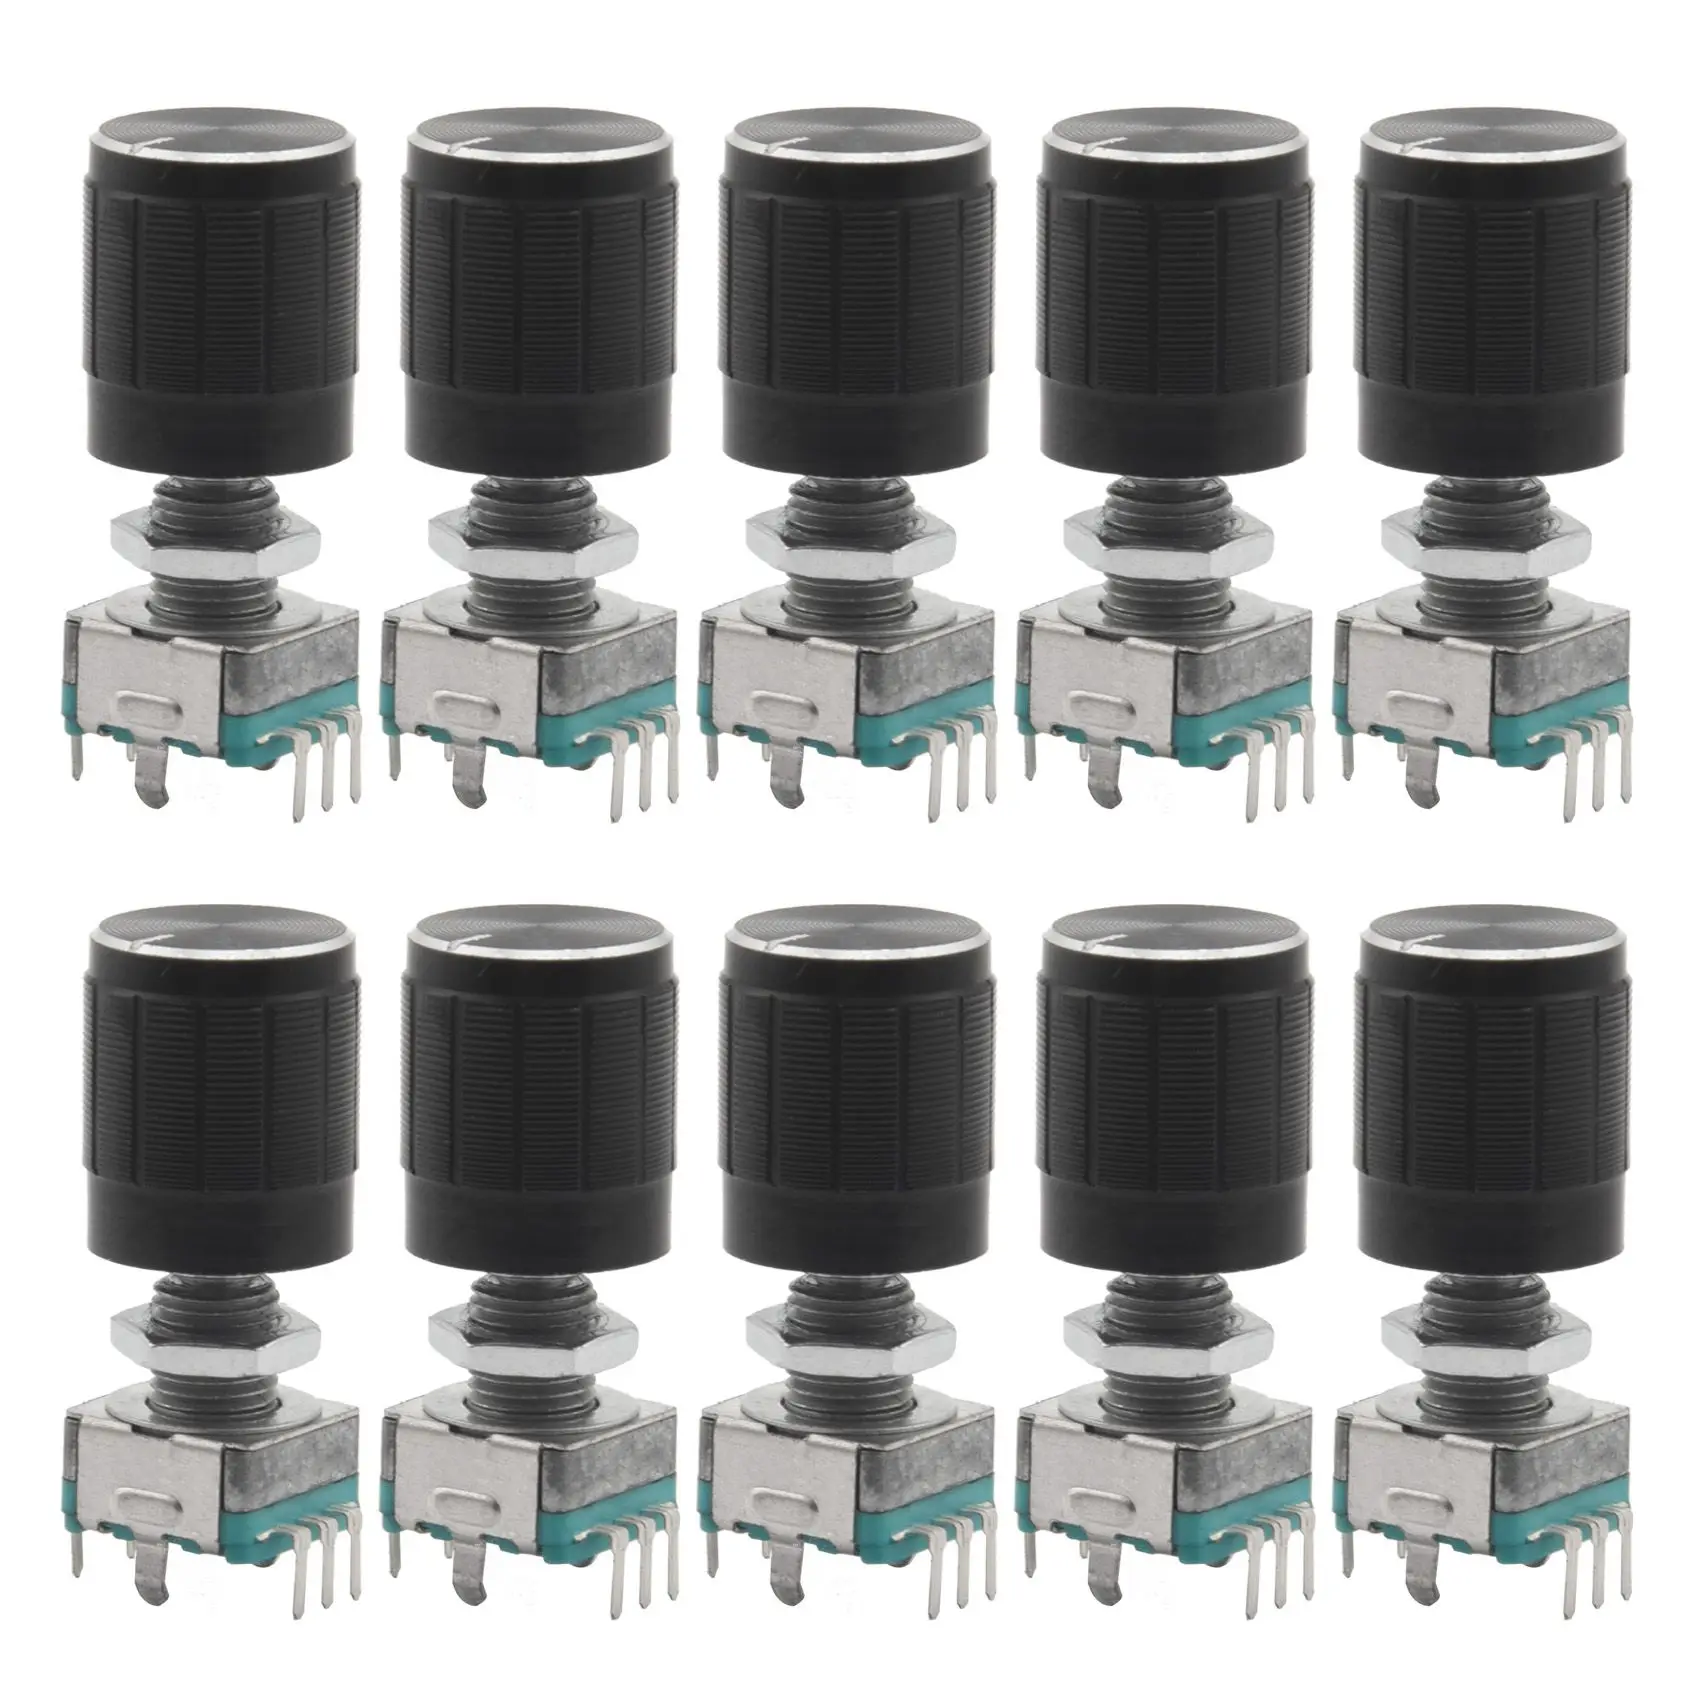 

(7 Pin 20MM)10 PCS 360 Degree EC11 Rotary Encoder Code Switch Digital Potentiometer with Caps